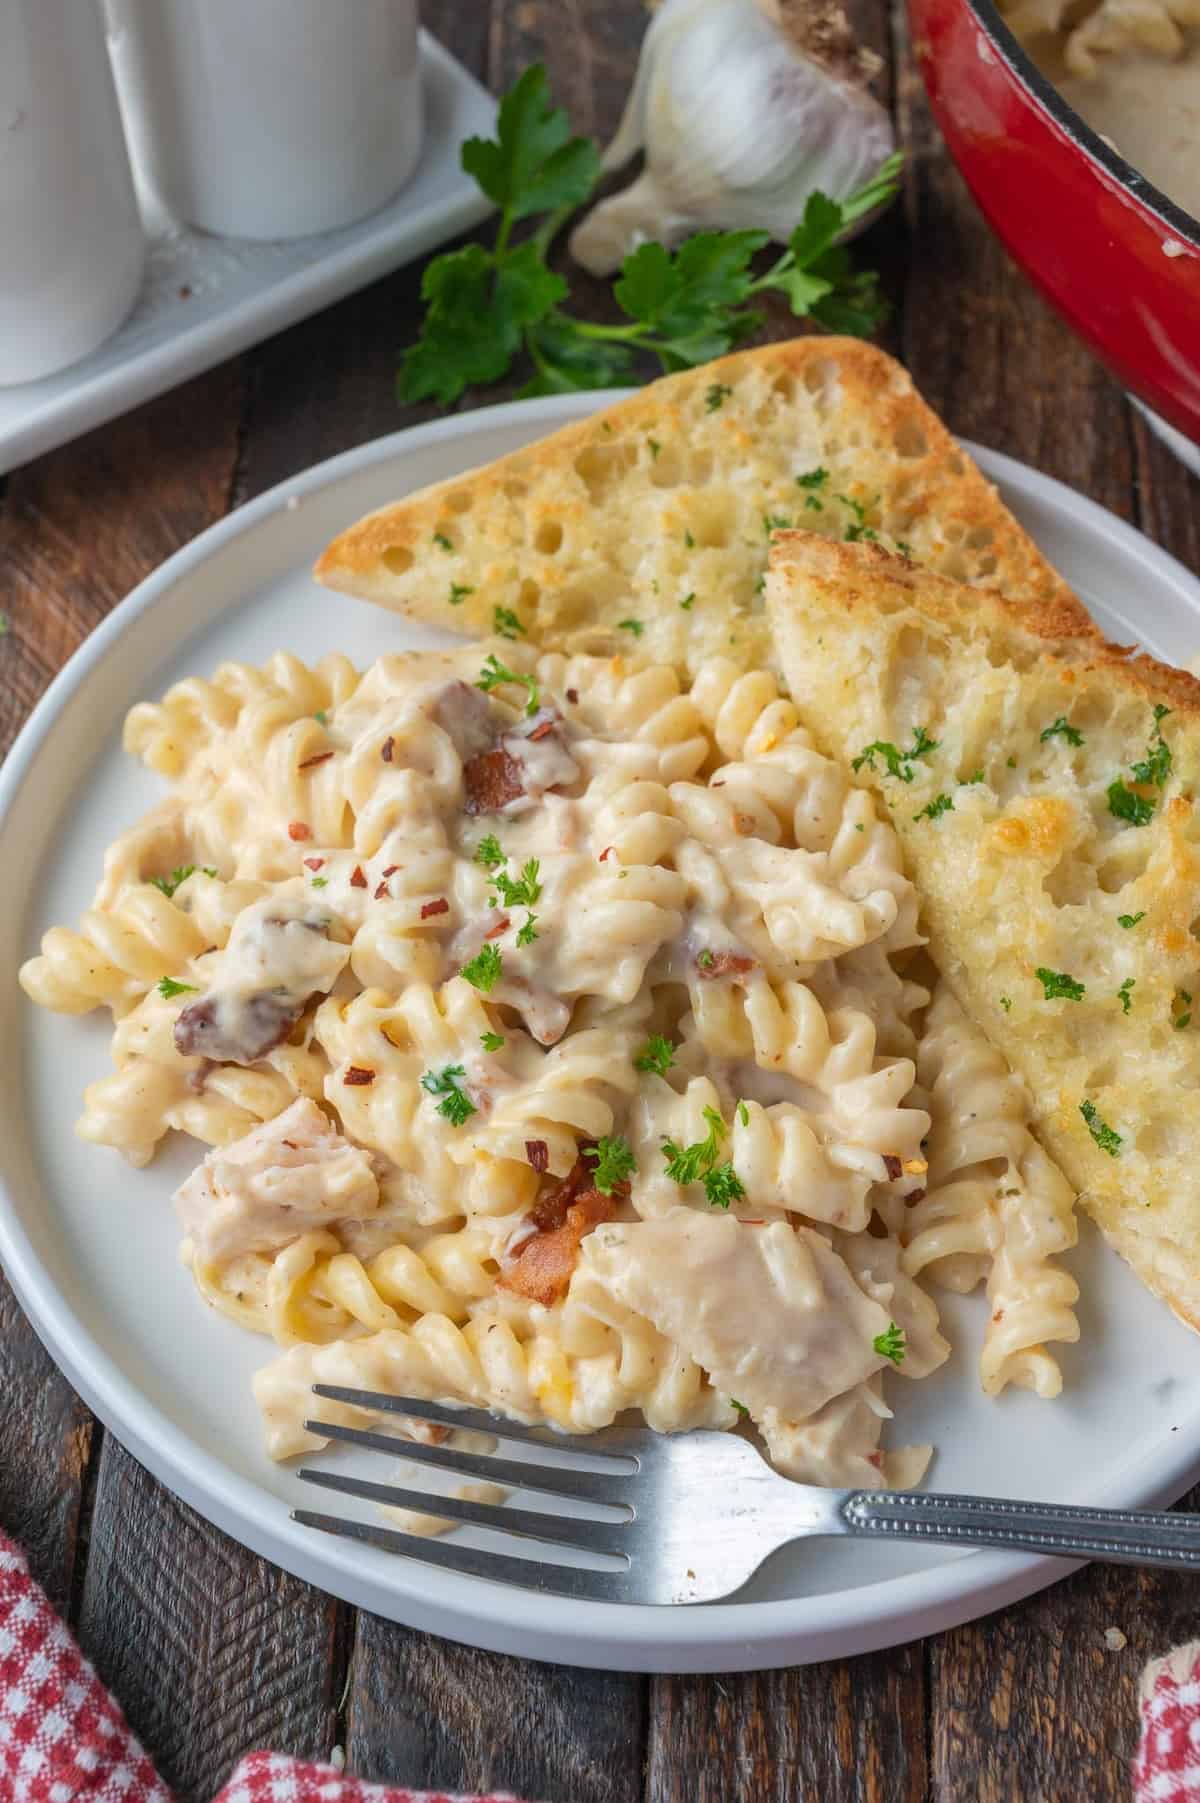 Chicken pasta on a plate with garlic bread.